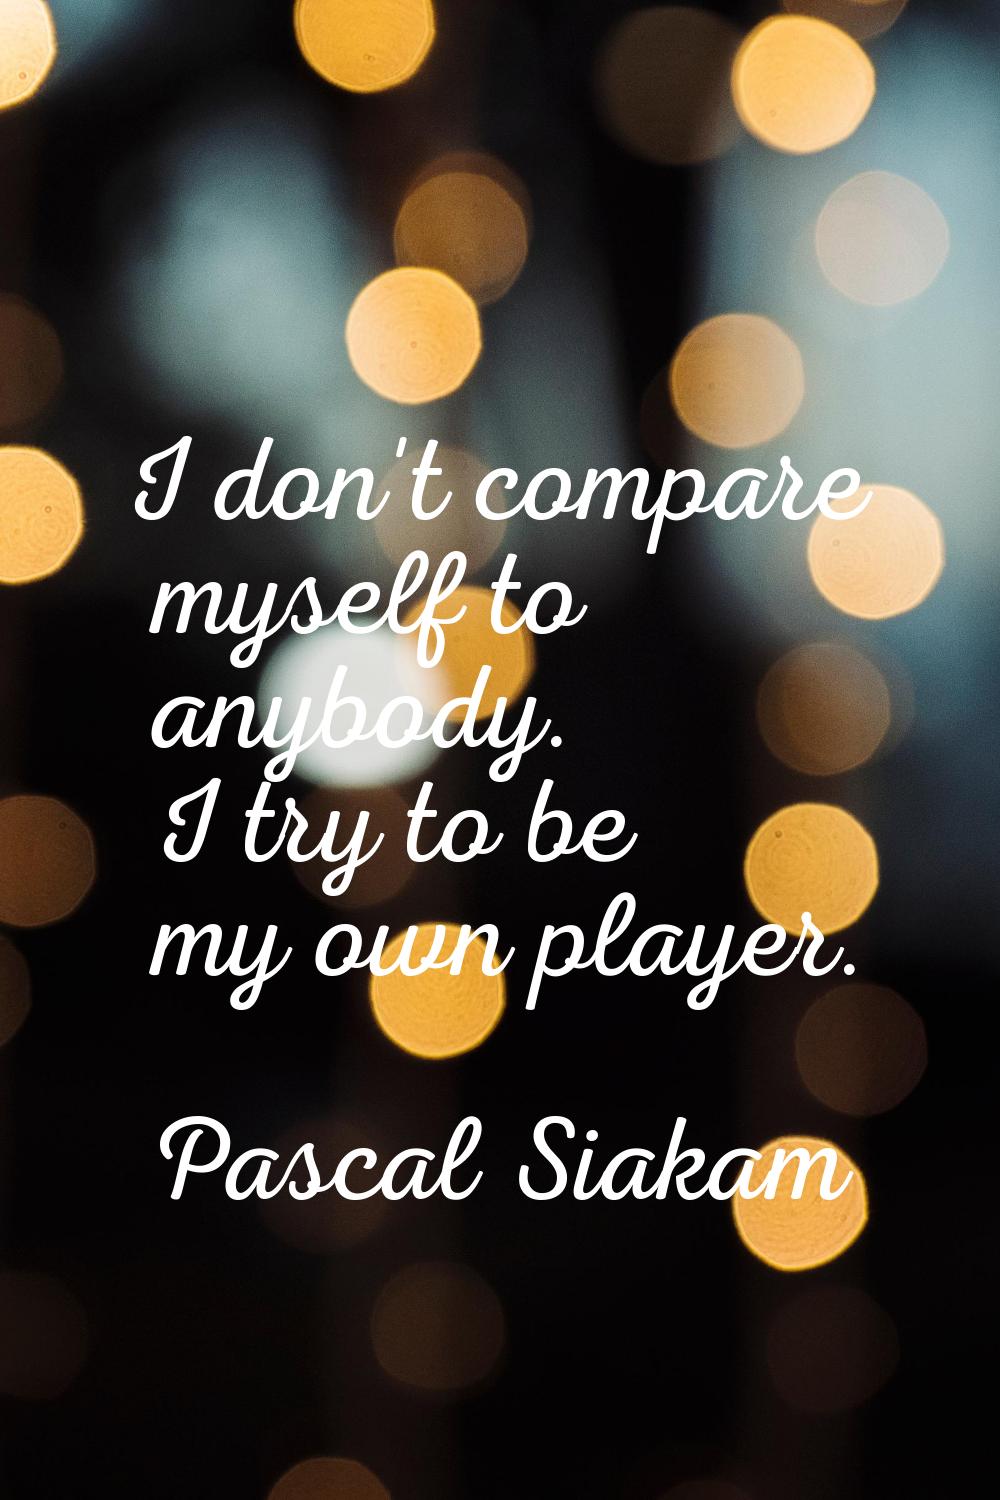 I don't compare myself to anybody. I try to be my own player.